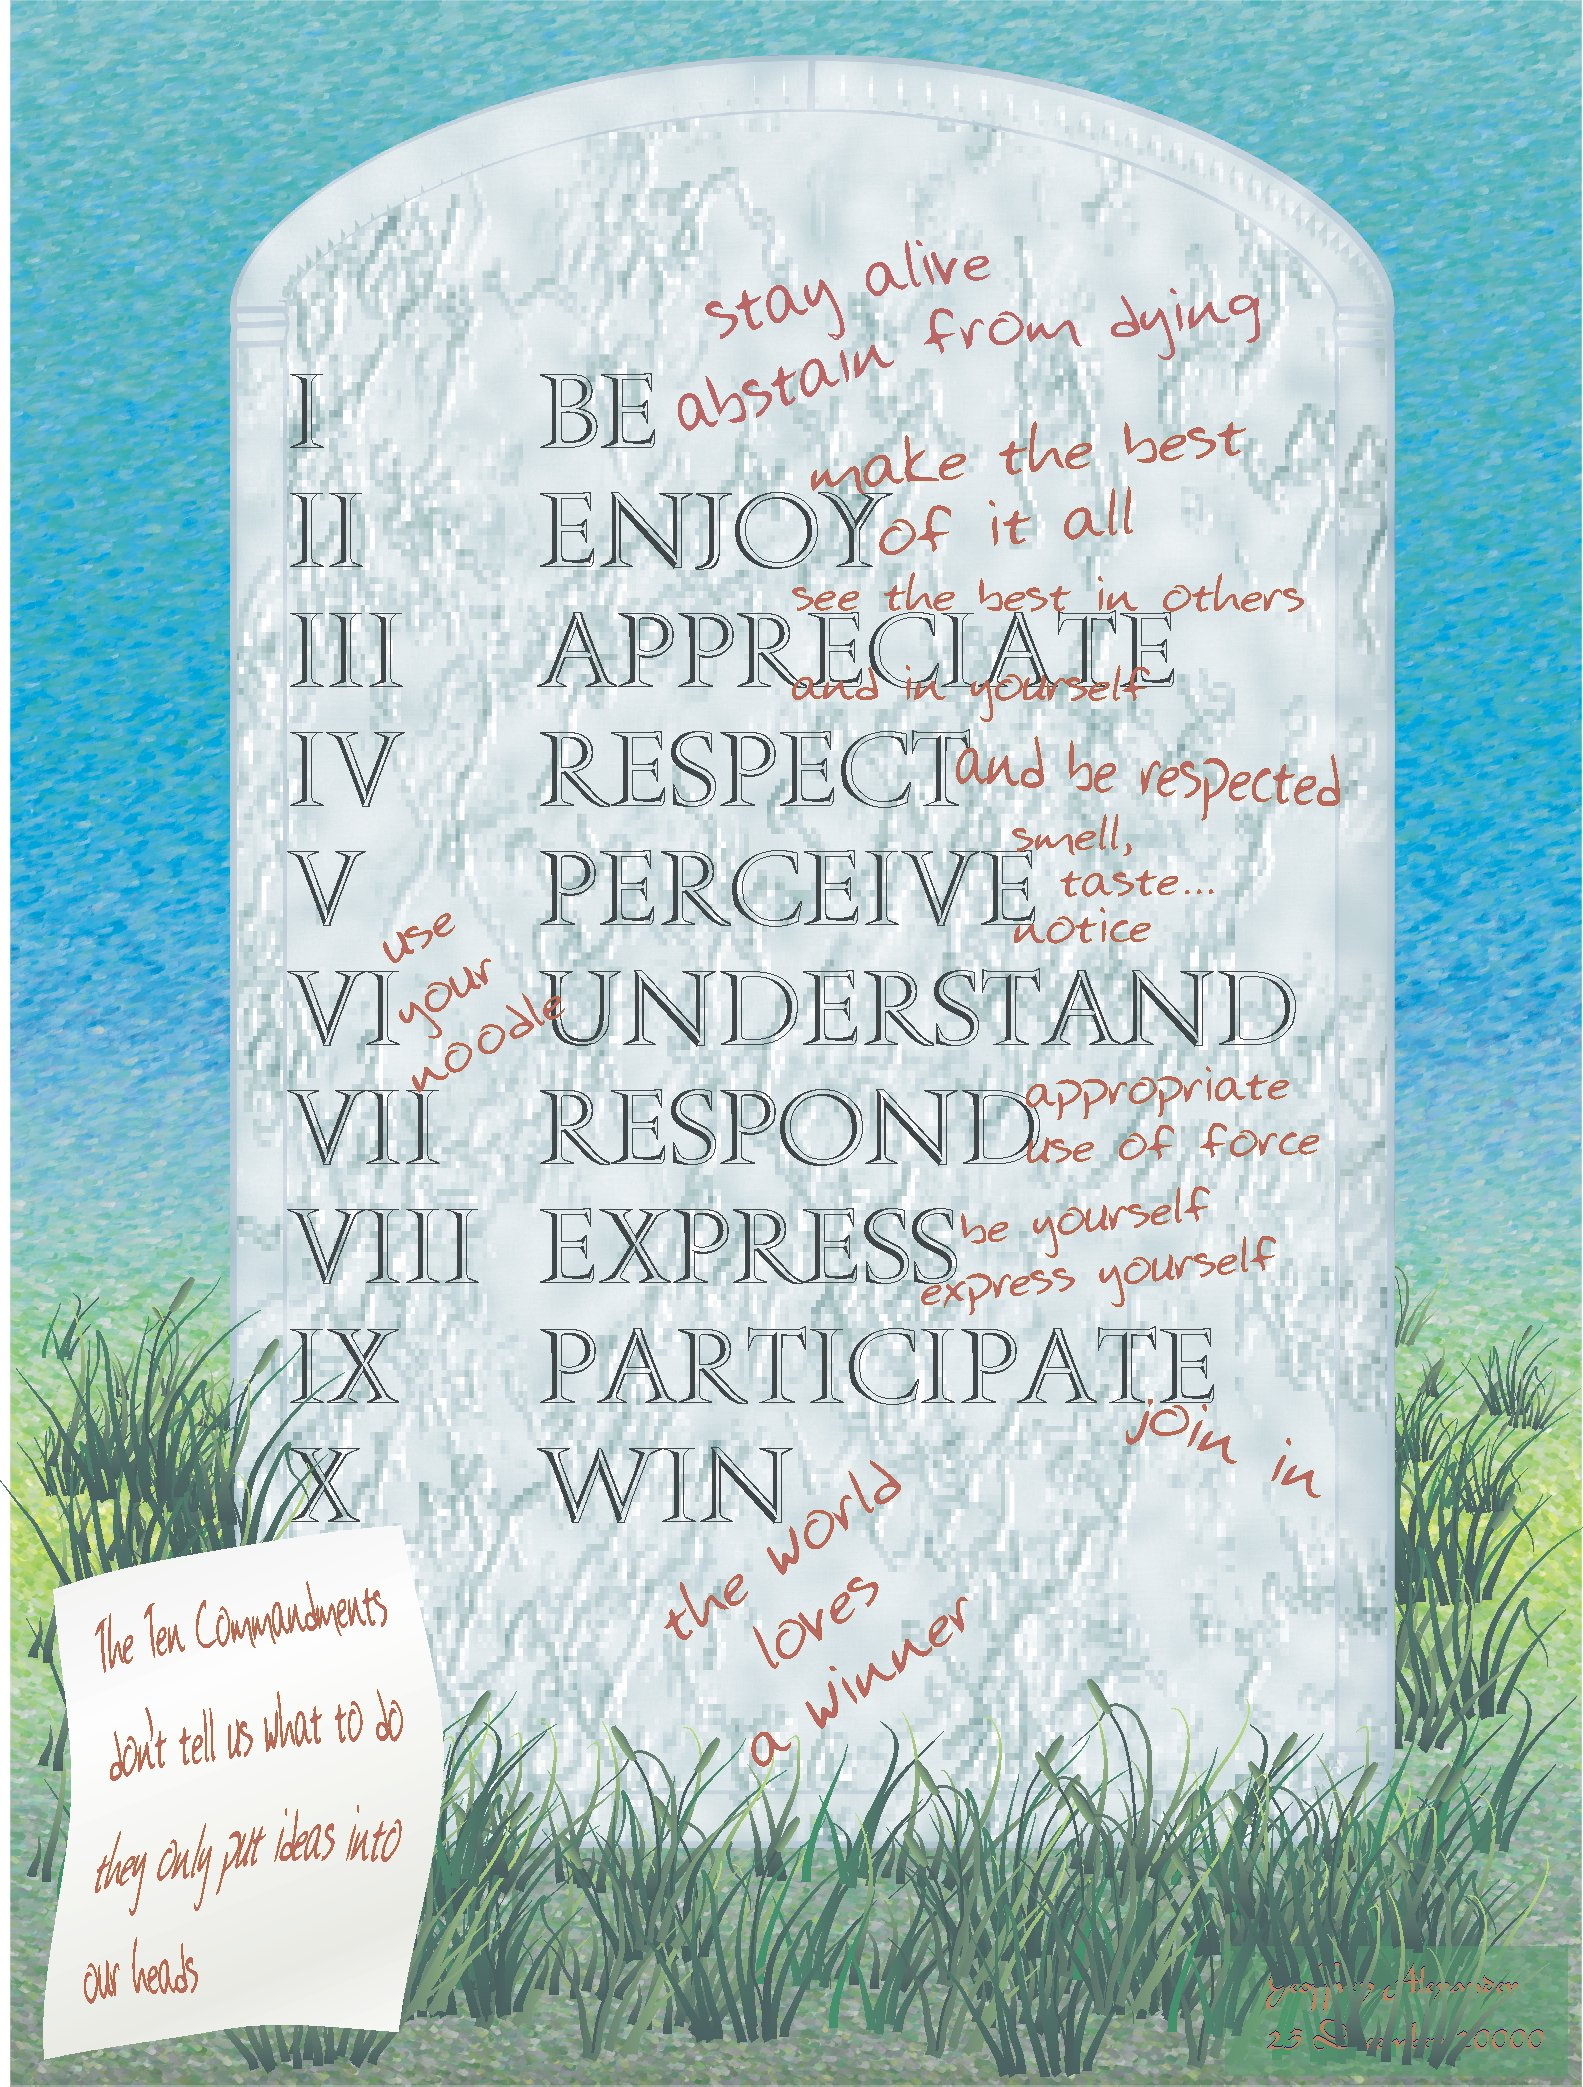 The Ten Commandments Revised to be more upbeat